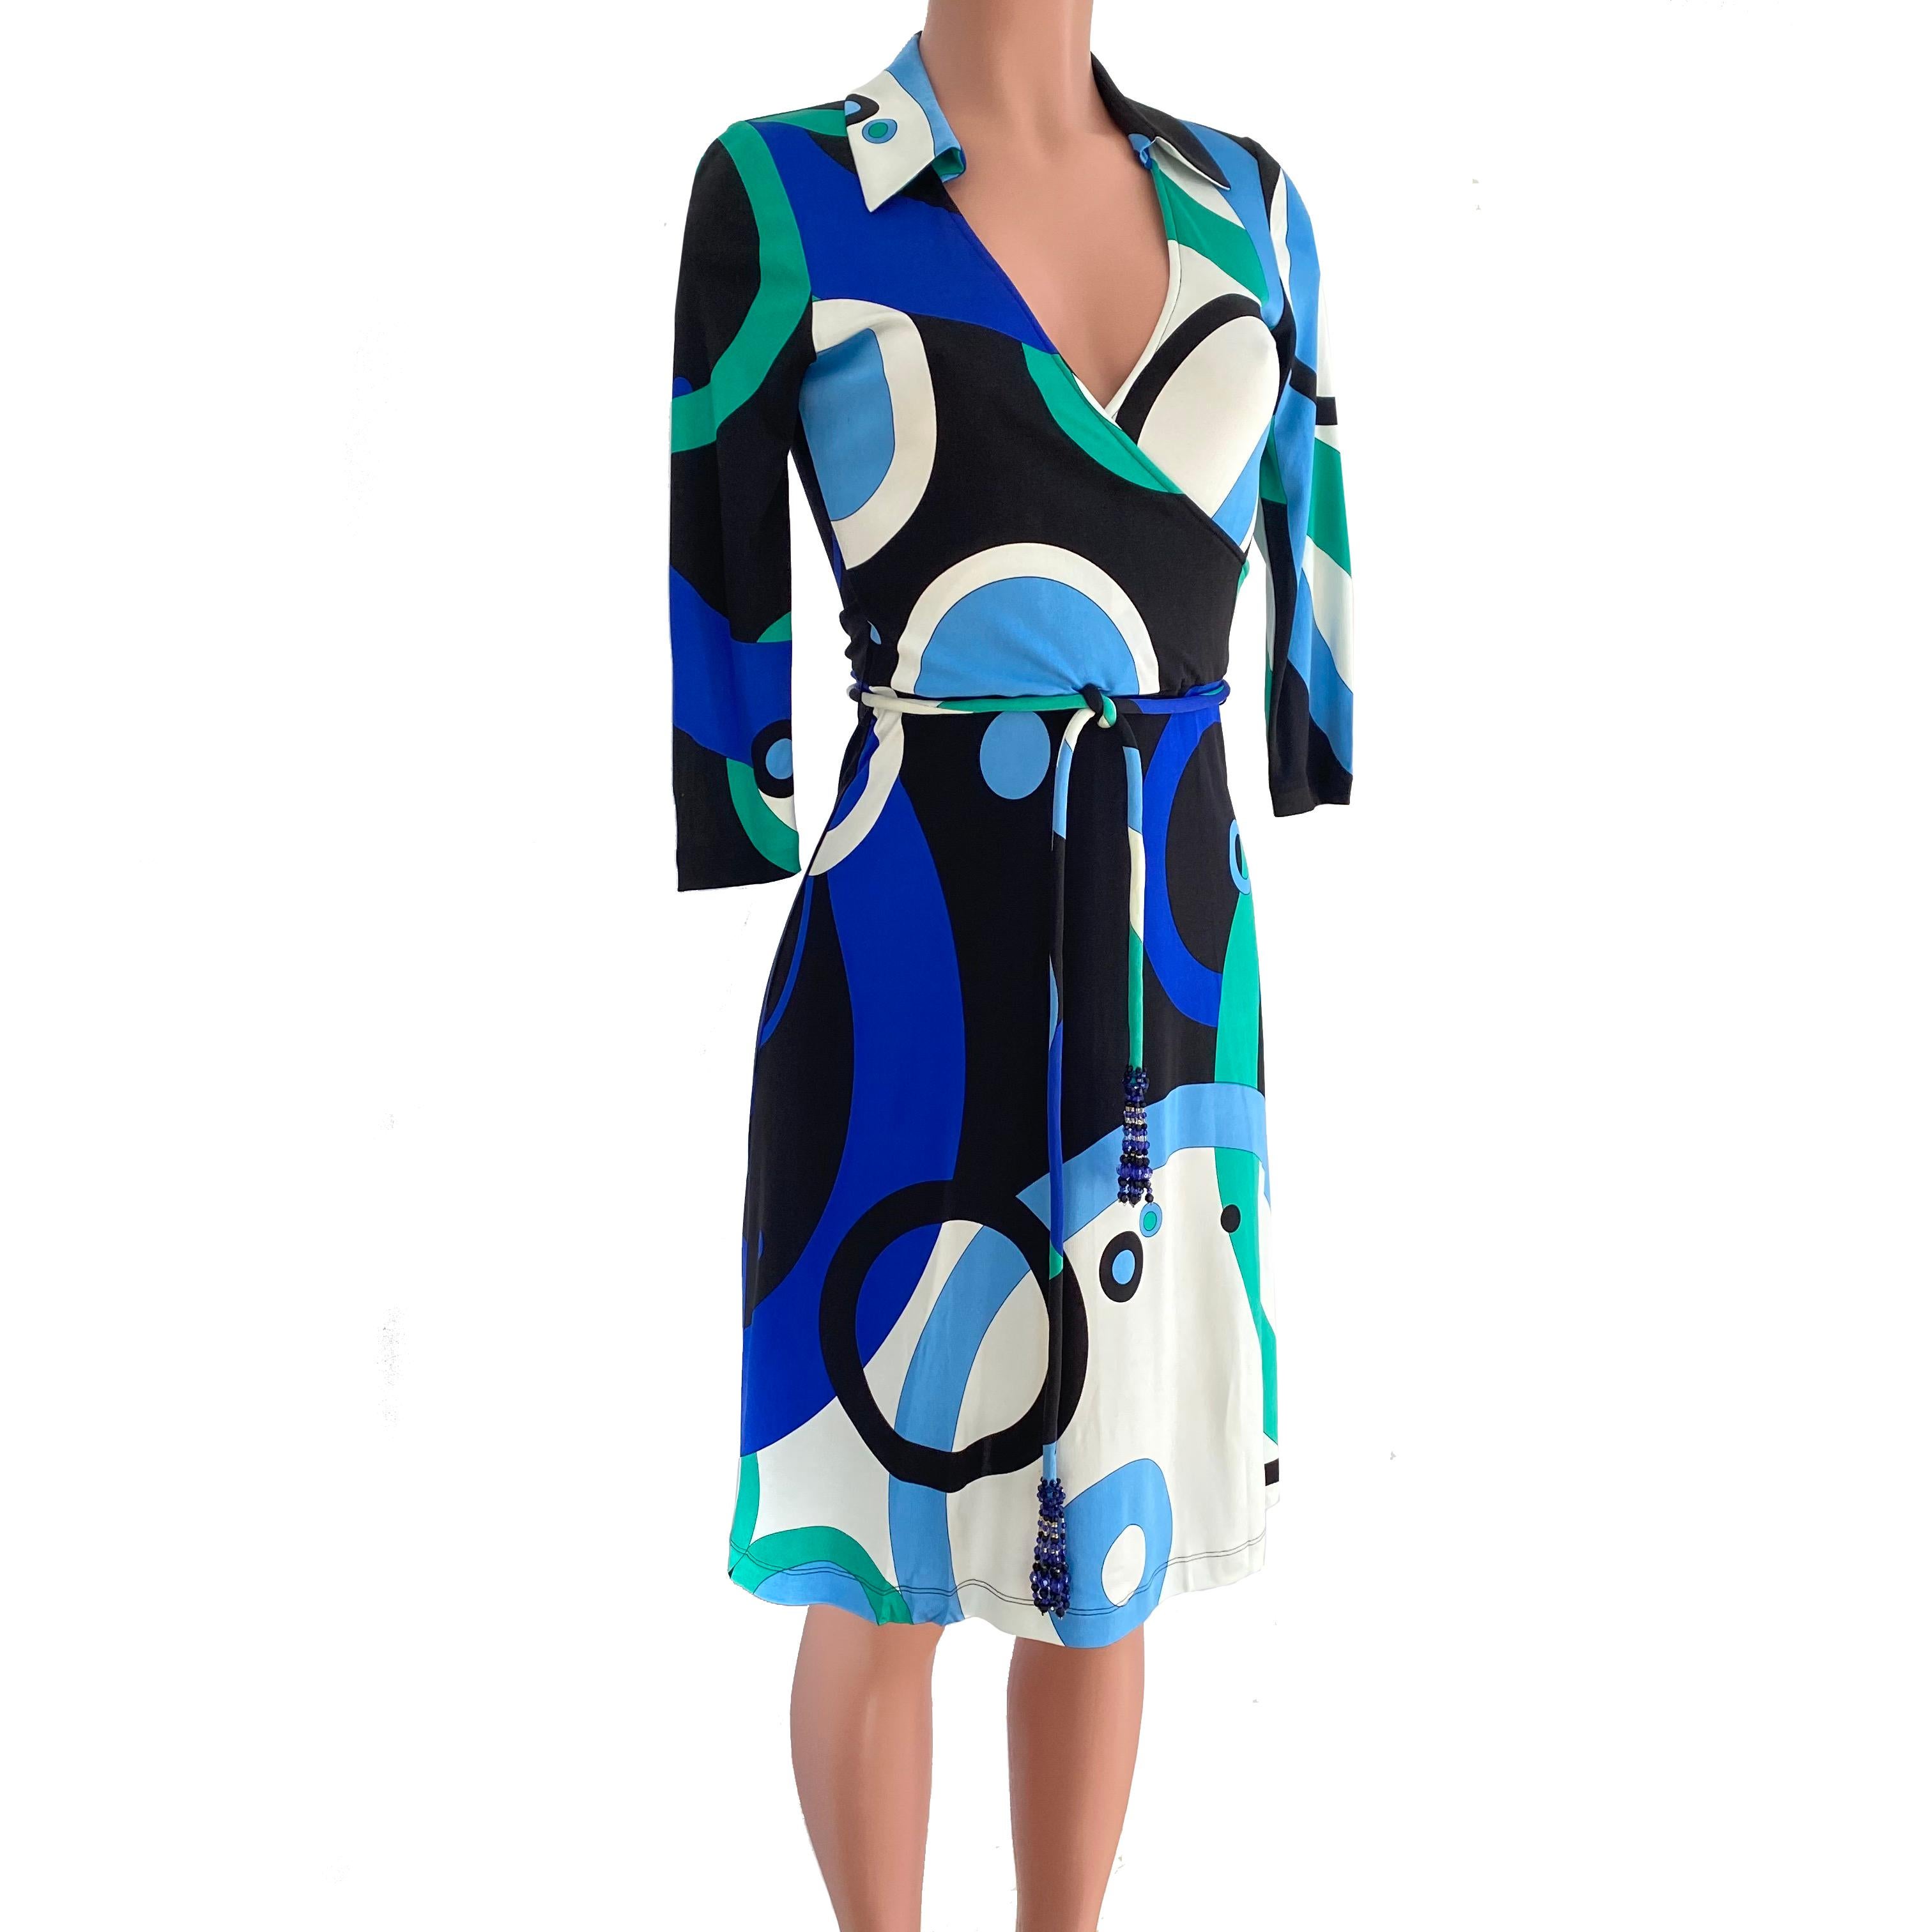 Mock wrap Shirt-collar dress with A-line skirt and 3/4 sleeves.
Original blue galaxy print from Flora Kung.
Detachable cord belt with blue beads–can be switched to a day belt for a more casual look.
Approximately 43